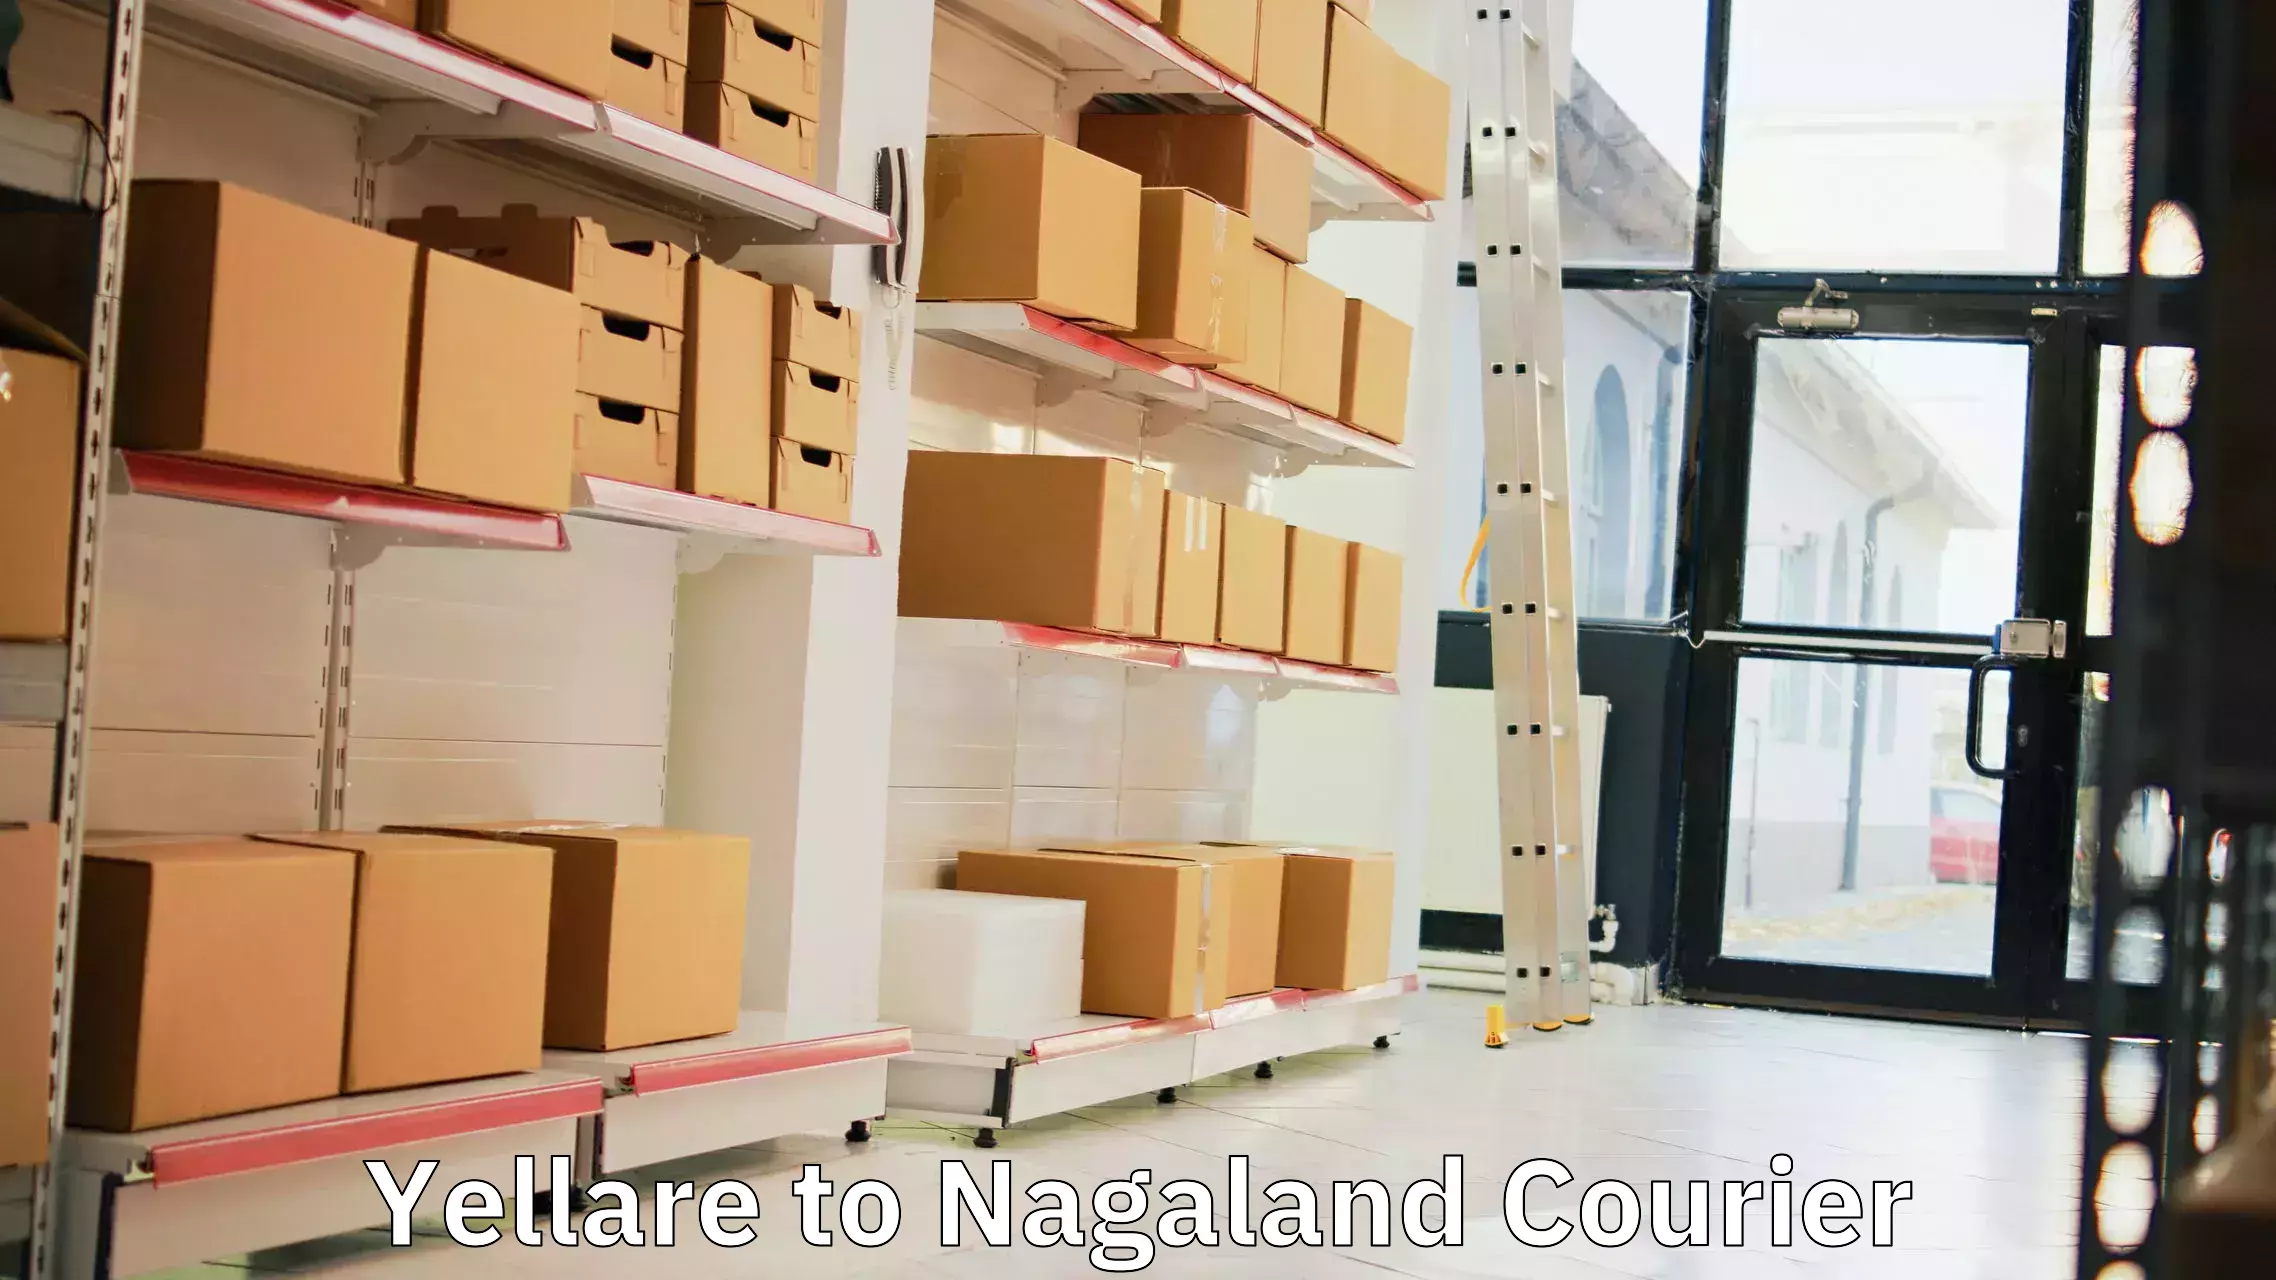 Automated parcel services Yellare to NIT Nagaland